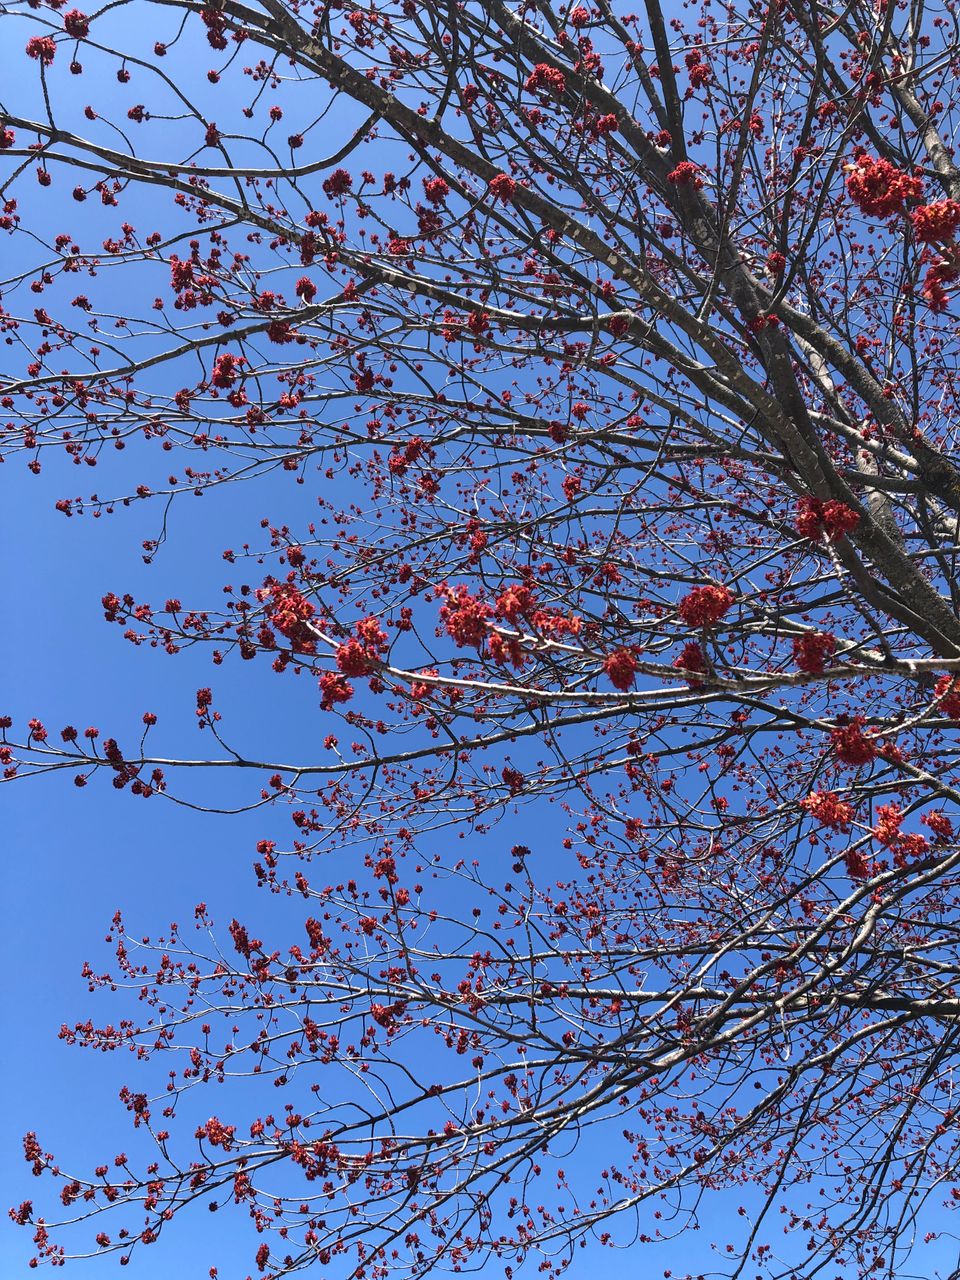 Tree branches against a bright blue sky, bursting with red buds.